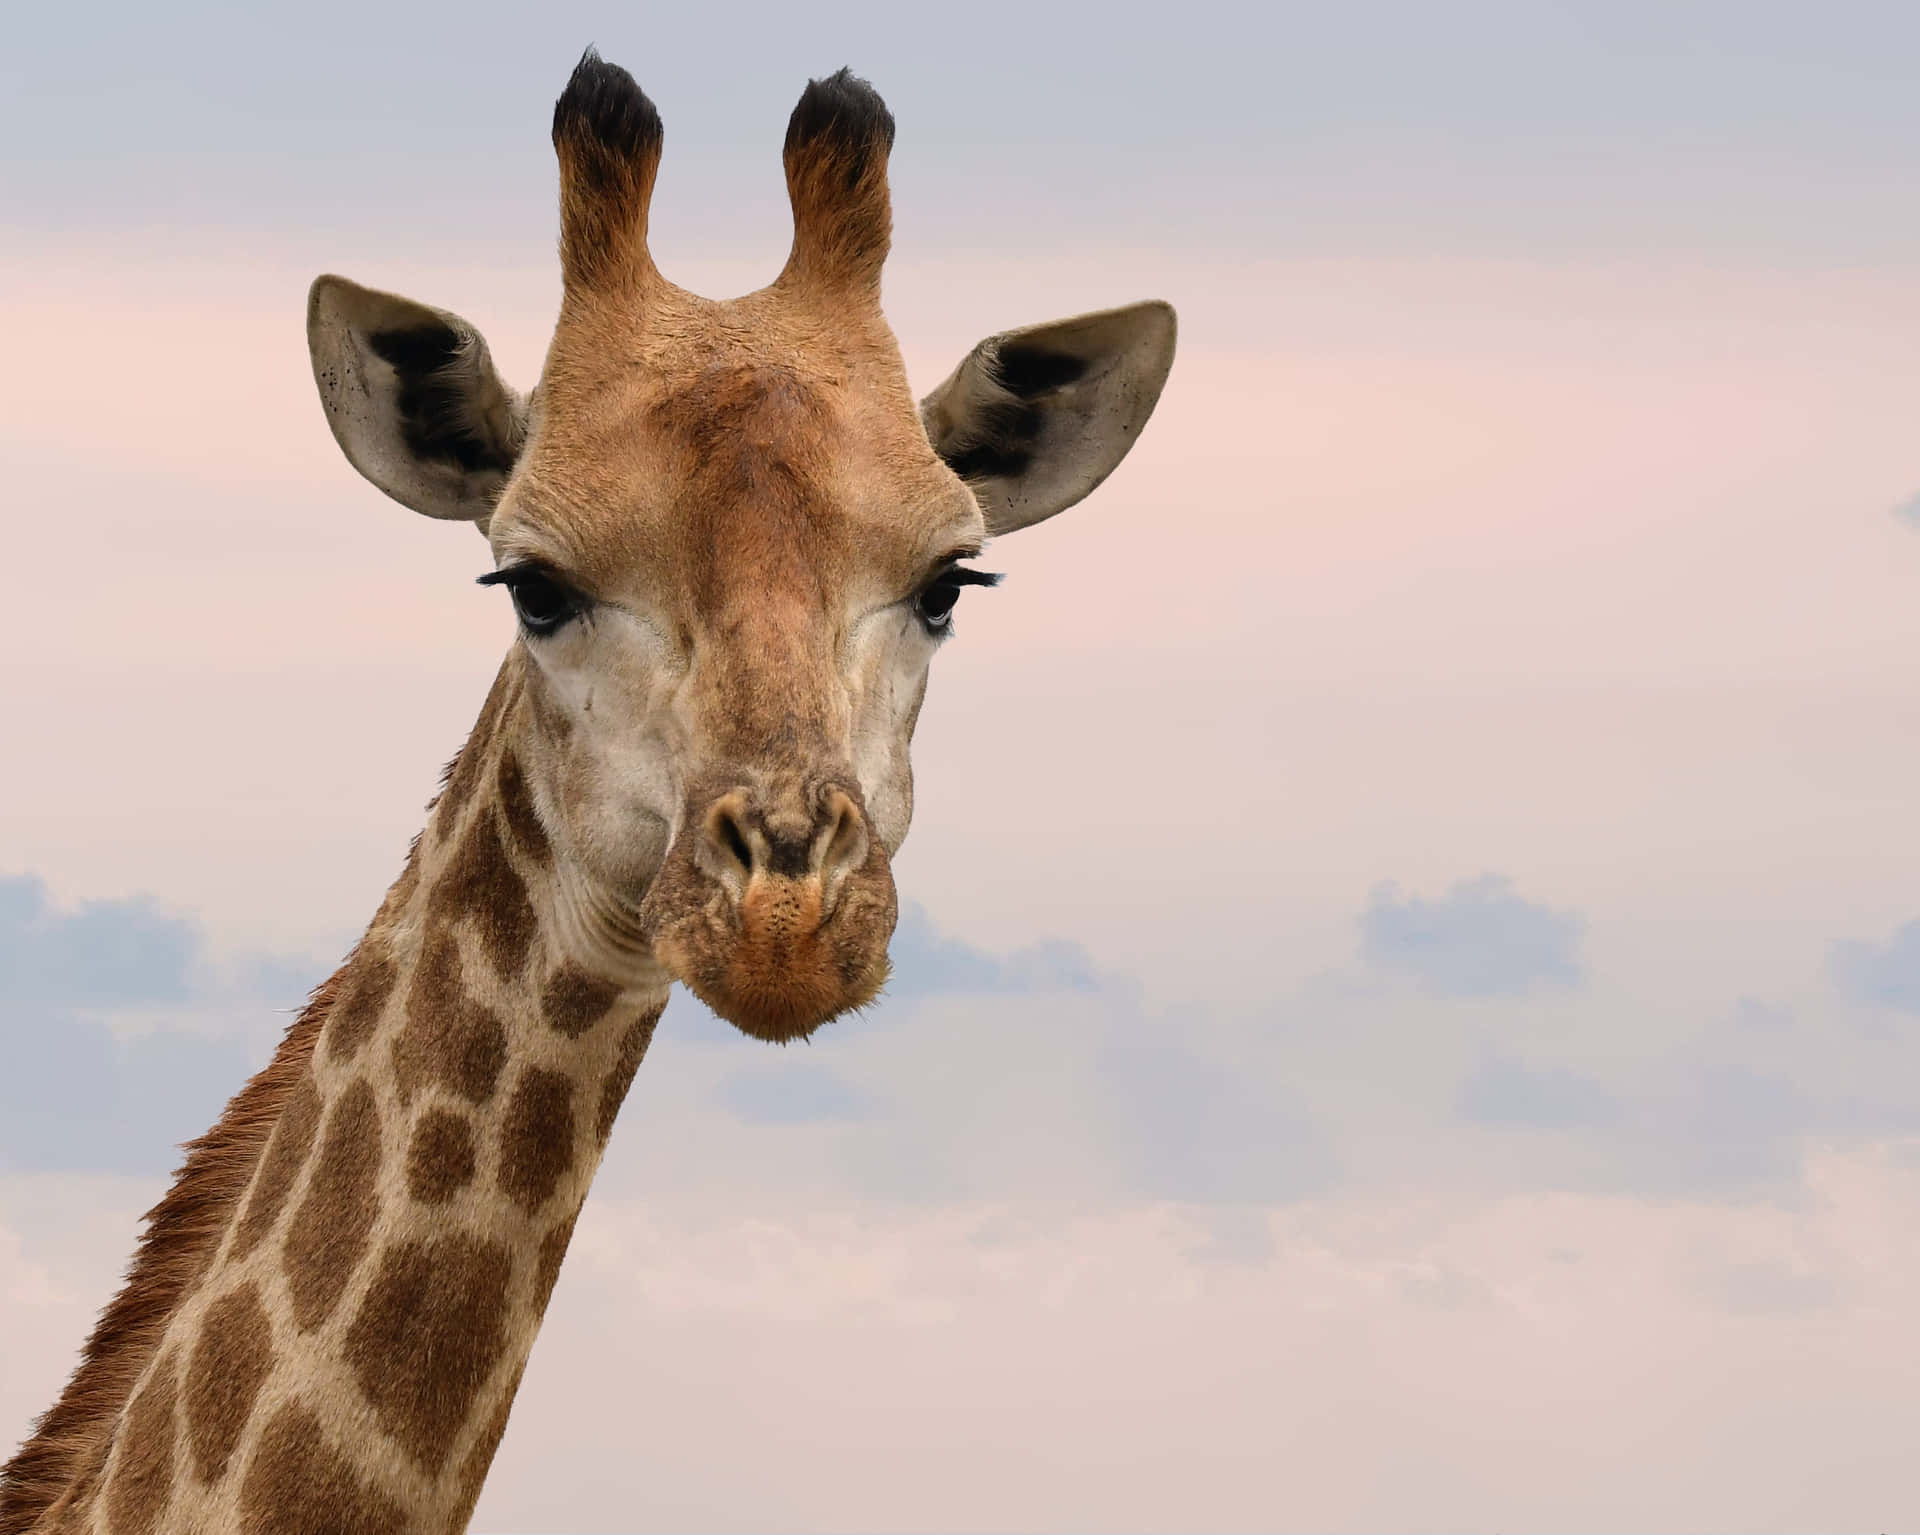 Funny Giraffe On Pastel Sky Picture